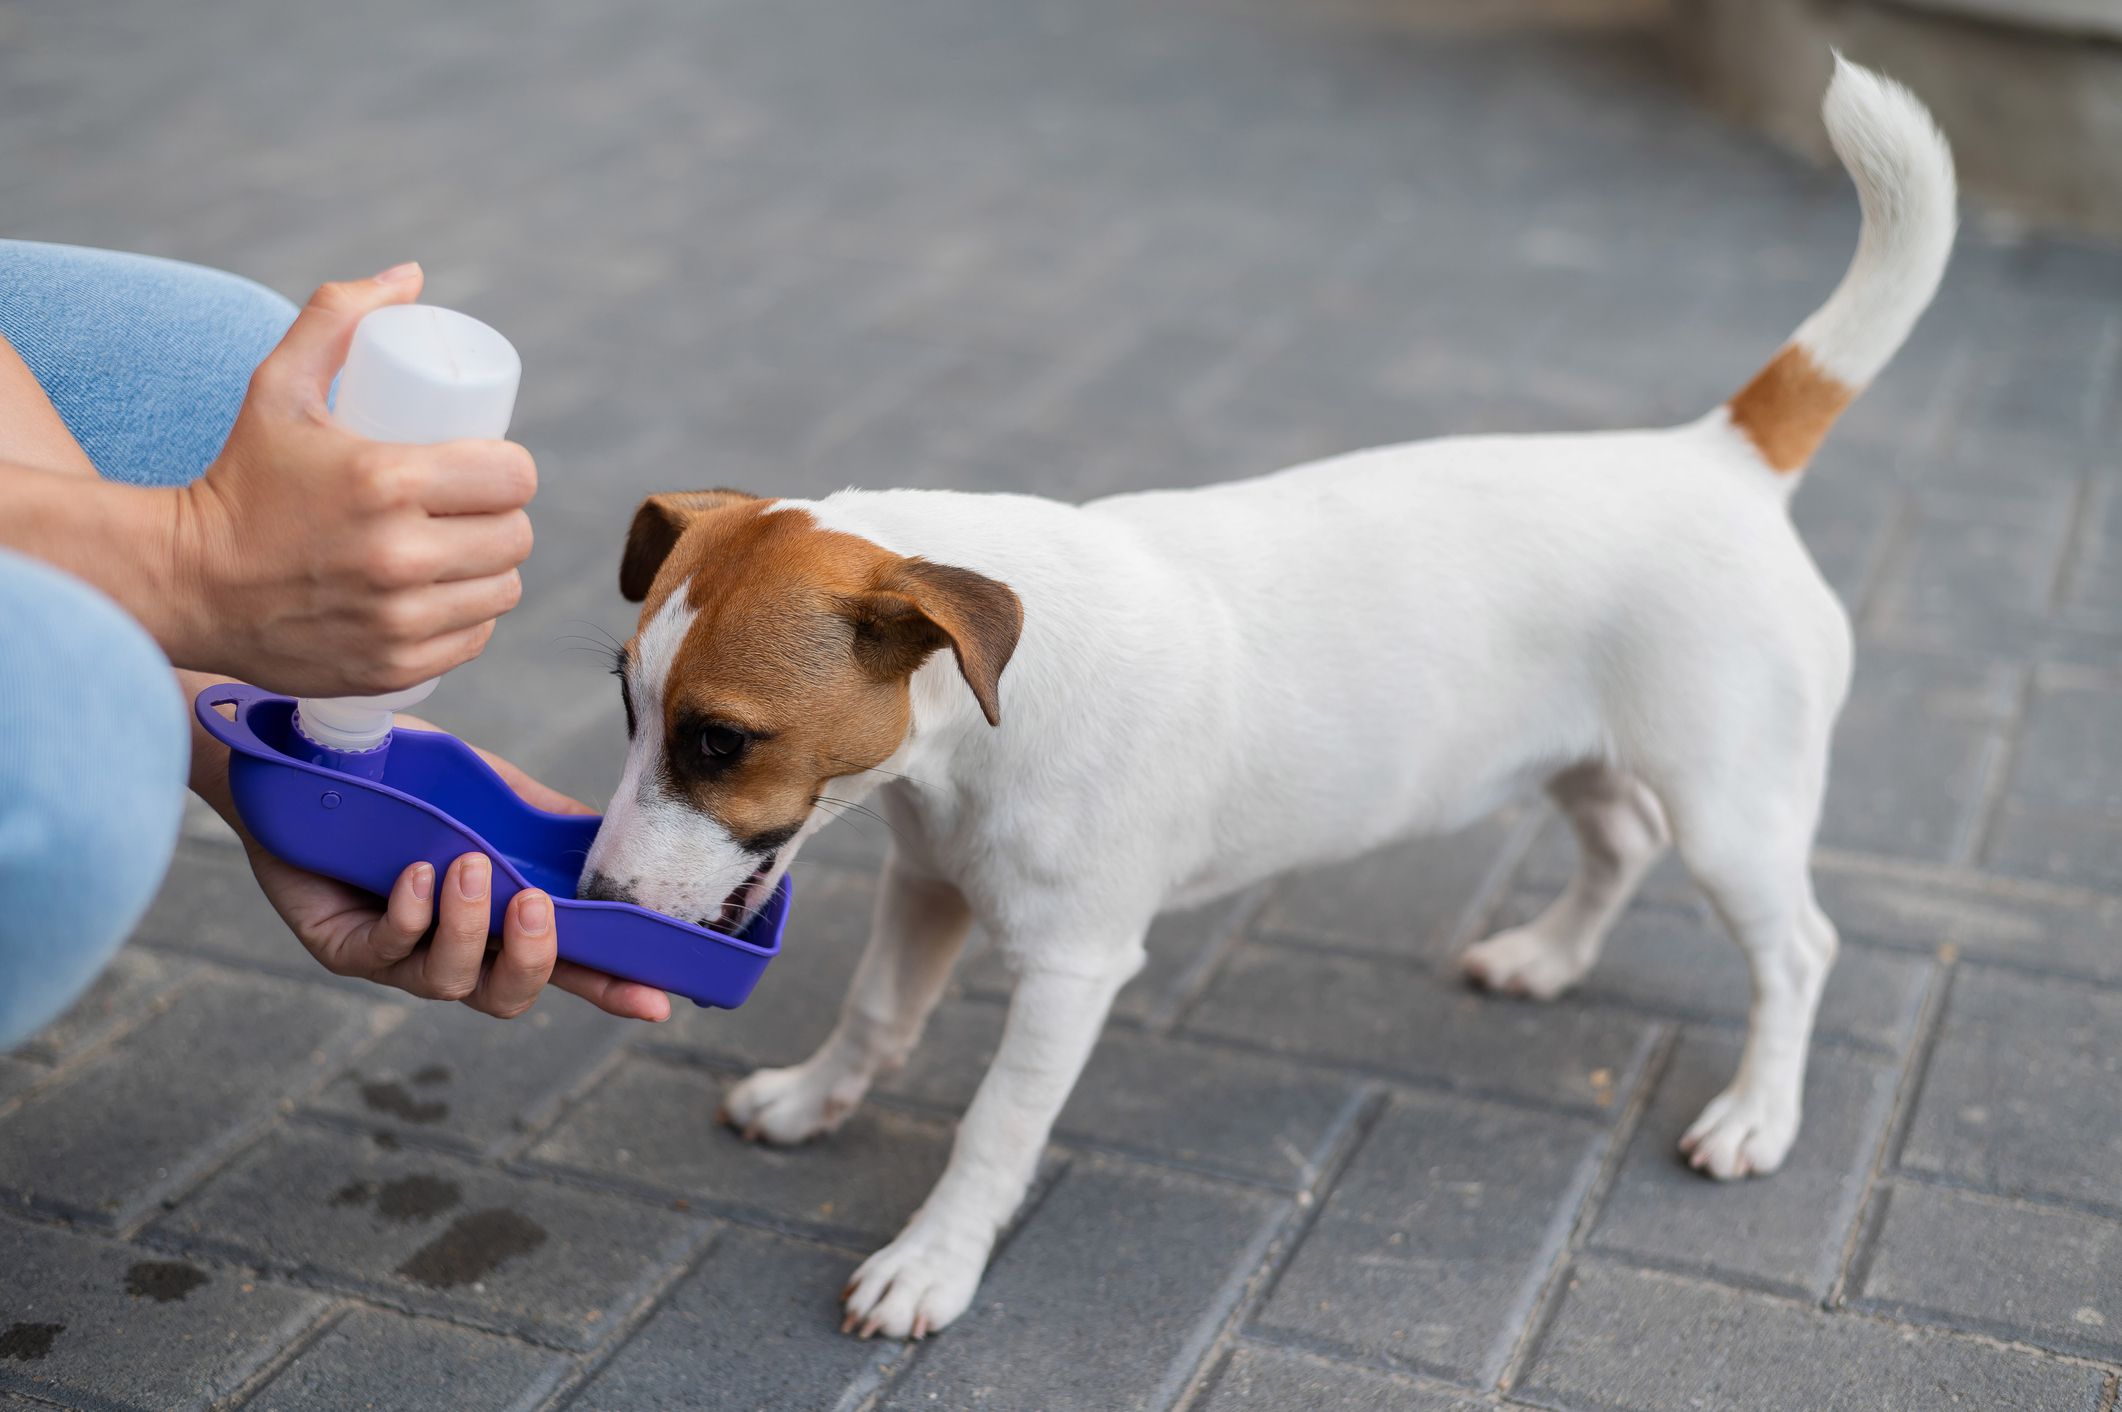 <p>At some point, be it while hiking or at a rest stop on a road trip, your pet is going to become thirsty. If you forget to bring a collapsible bowl, you may have to buy one on the road if you don’t have an empty cup large enough for them to drink from.</p>